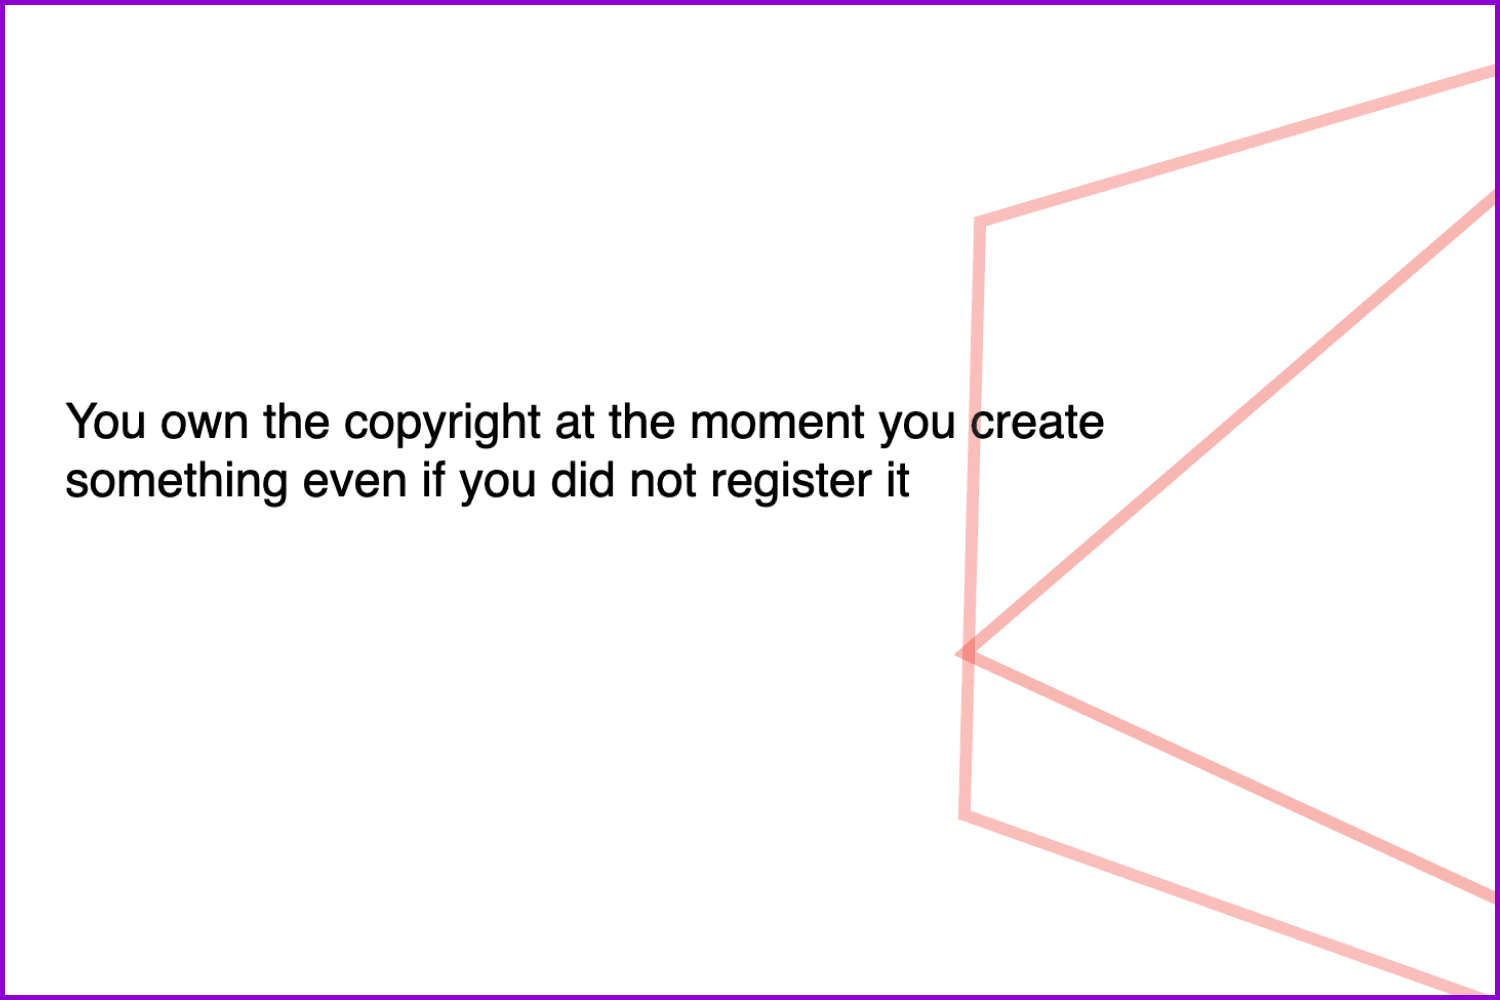 You own the copyright at the moment you create something.